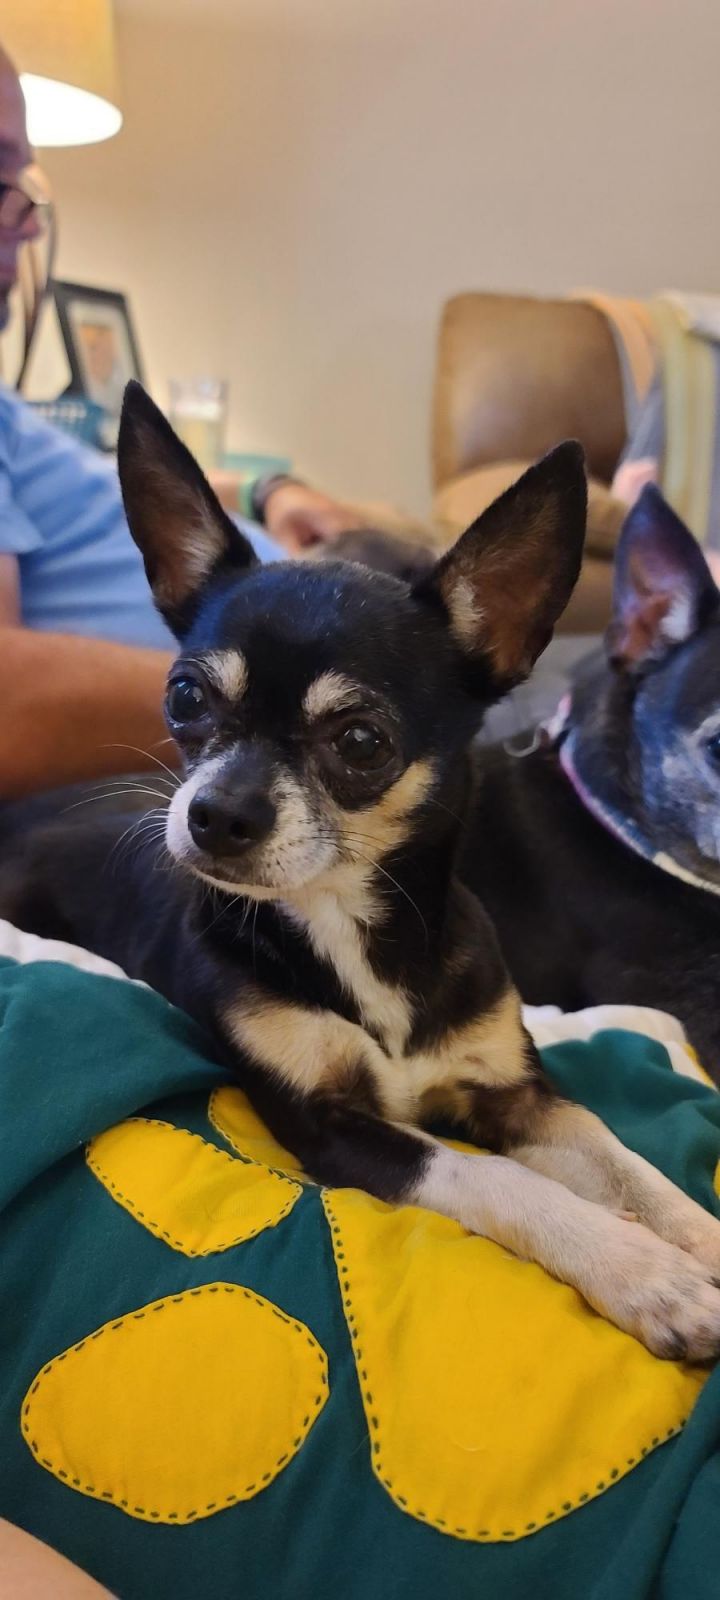 Dog for adoption Mandy, a Chihuahua in Ladson, SC